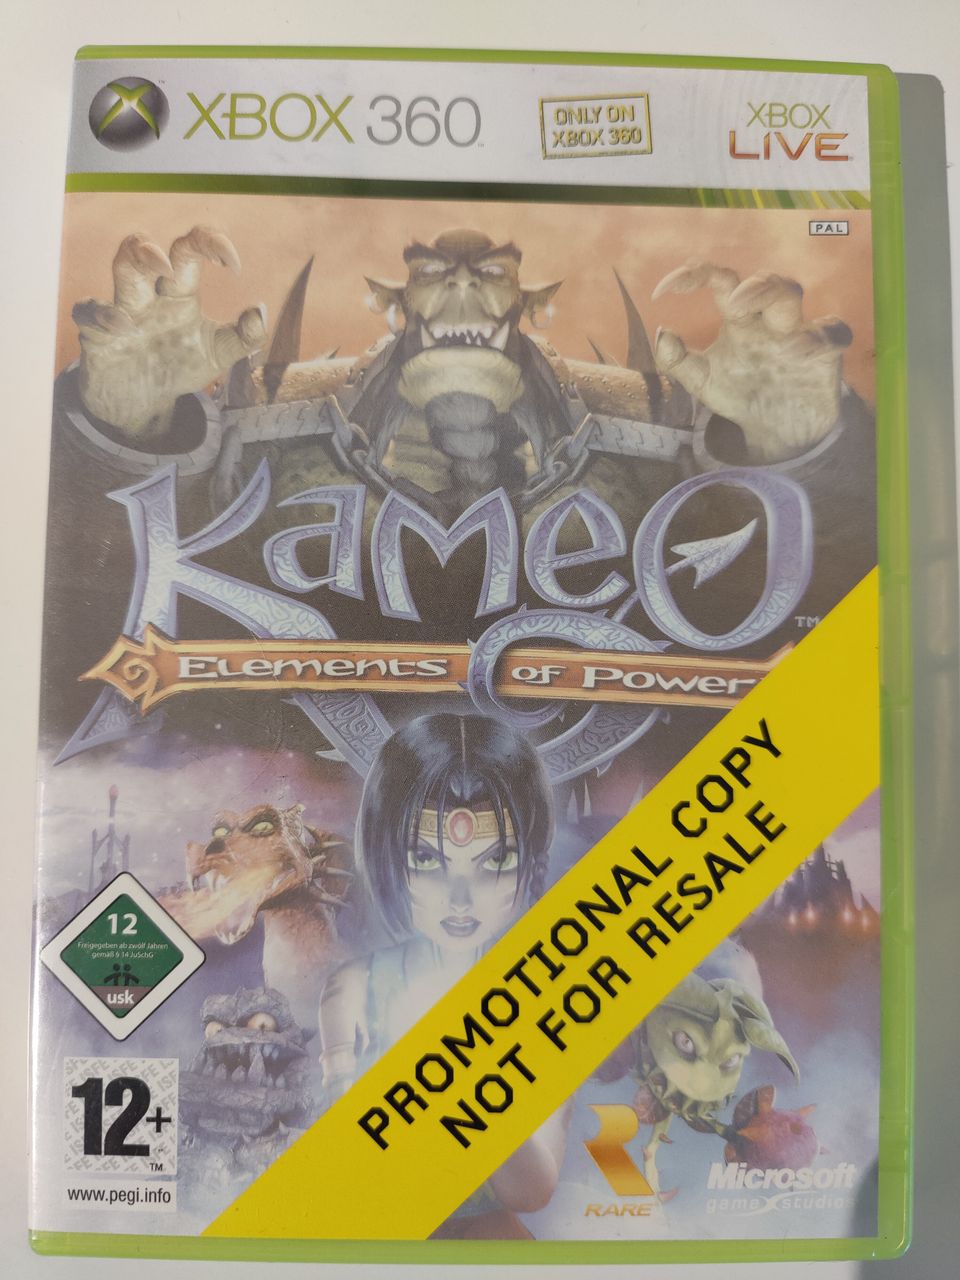 Xbox 360 Kameo: Elements of Power (Promotion)